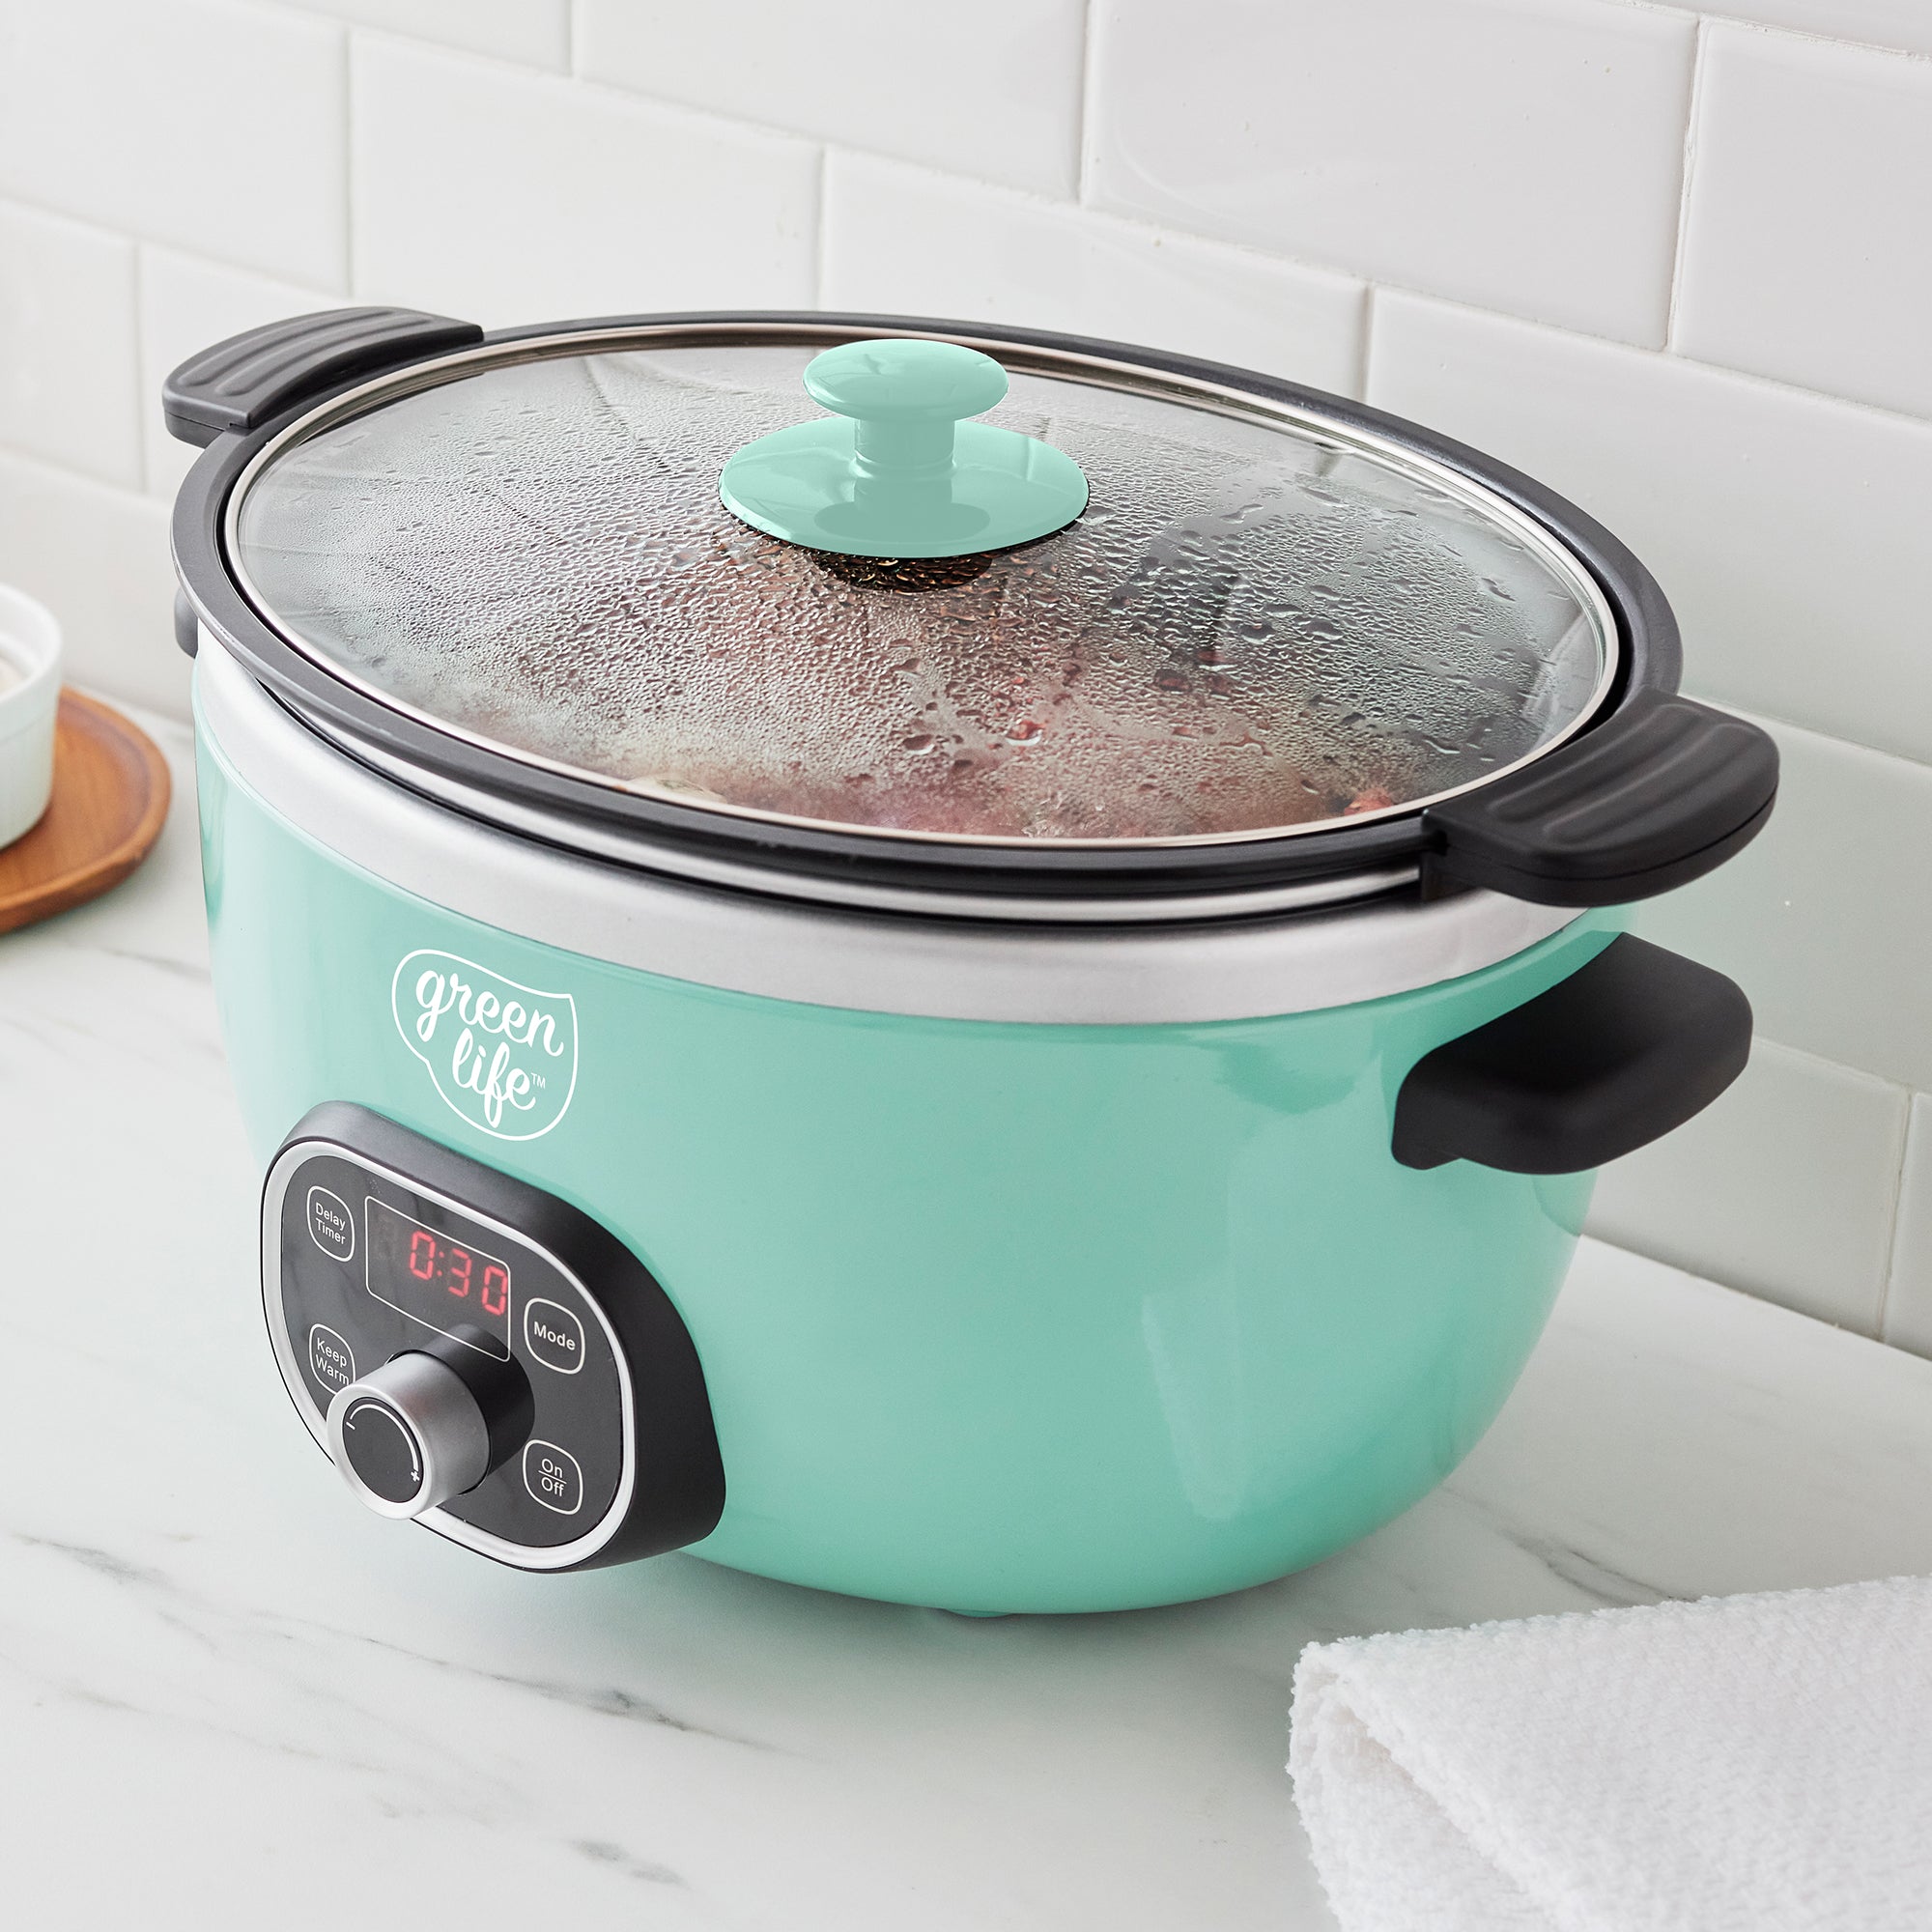 This 'Friends' Slow Cooker Trio Is The Only Appliance You Need